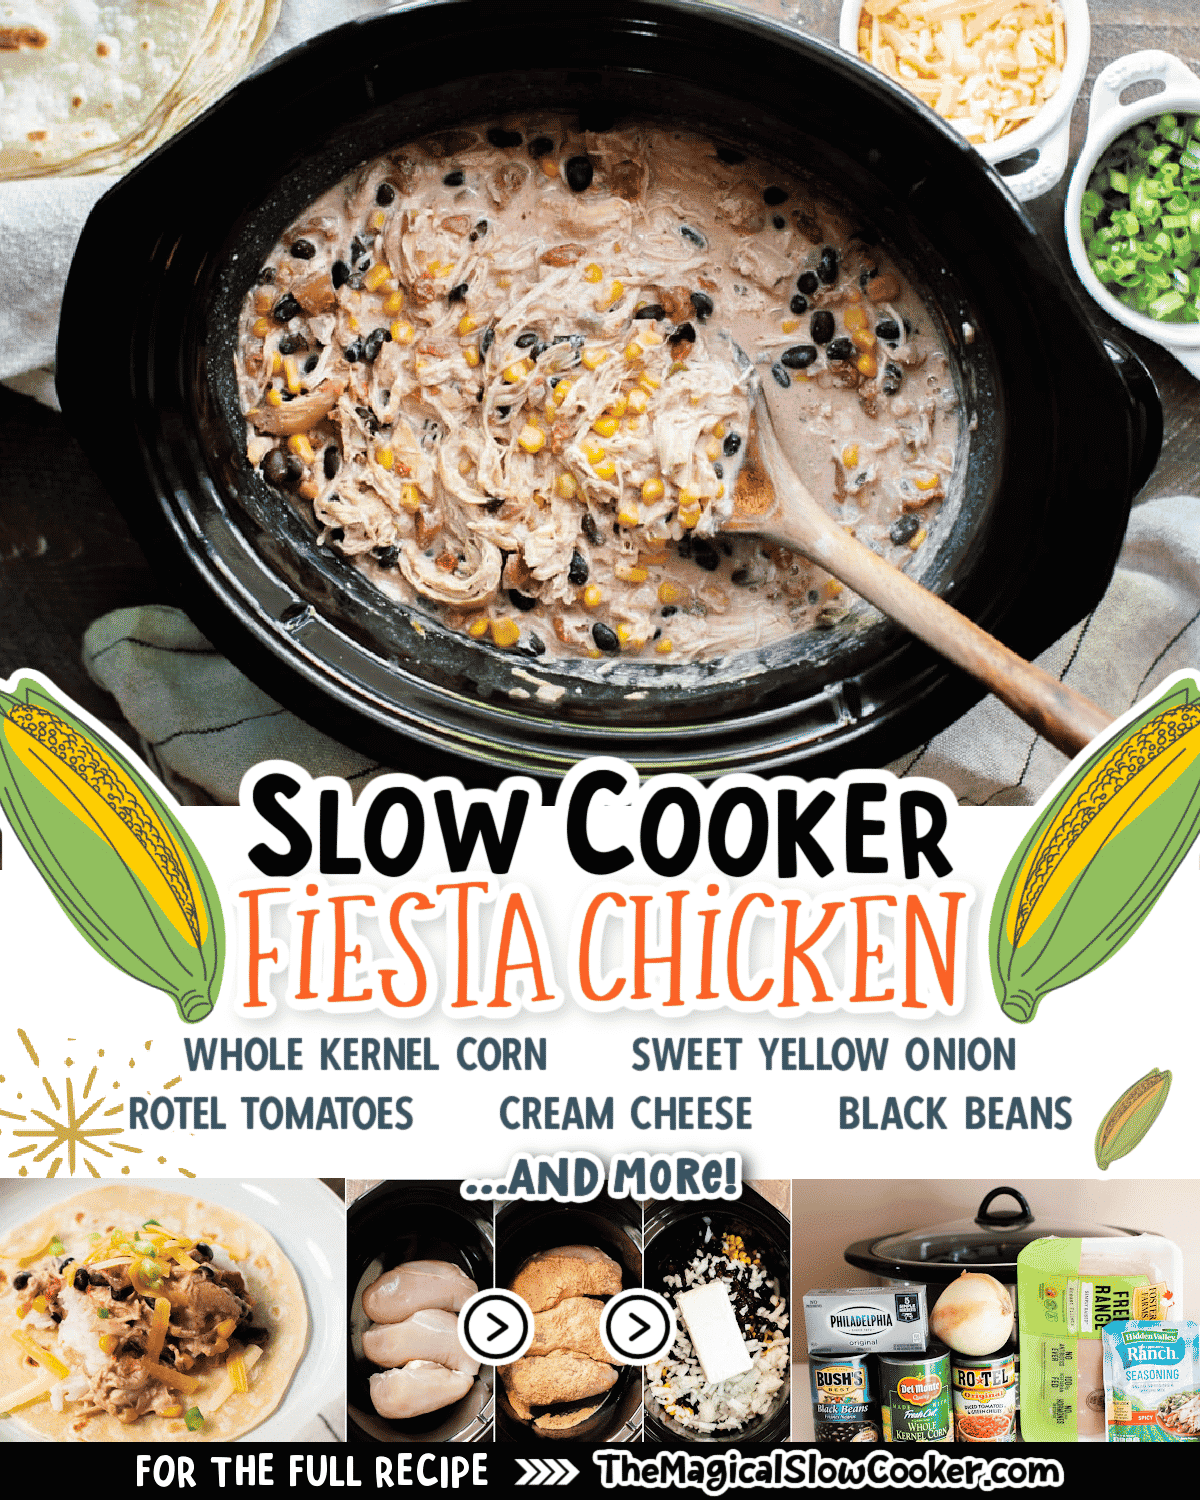 collage of fiesta chicken images with text of ingredients.